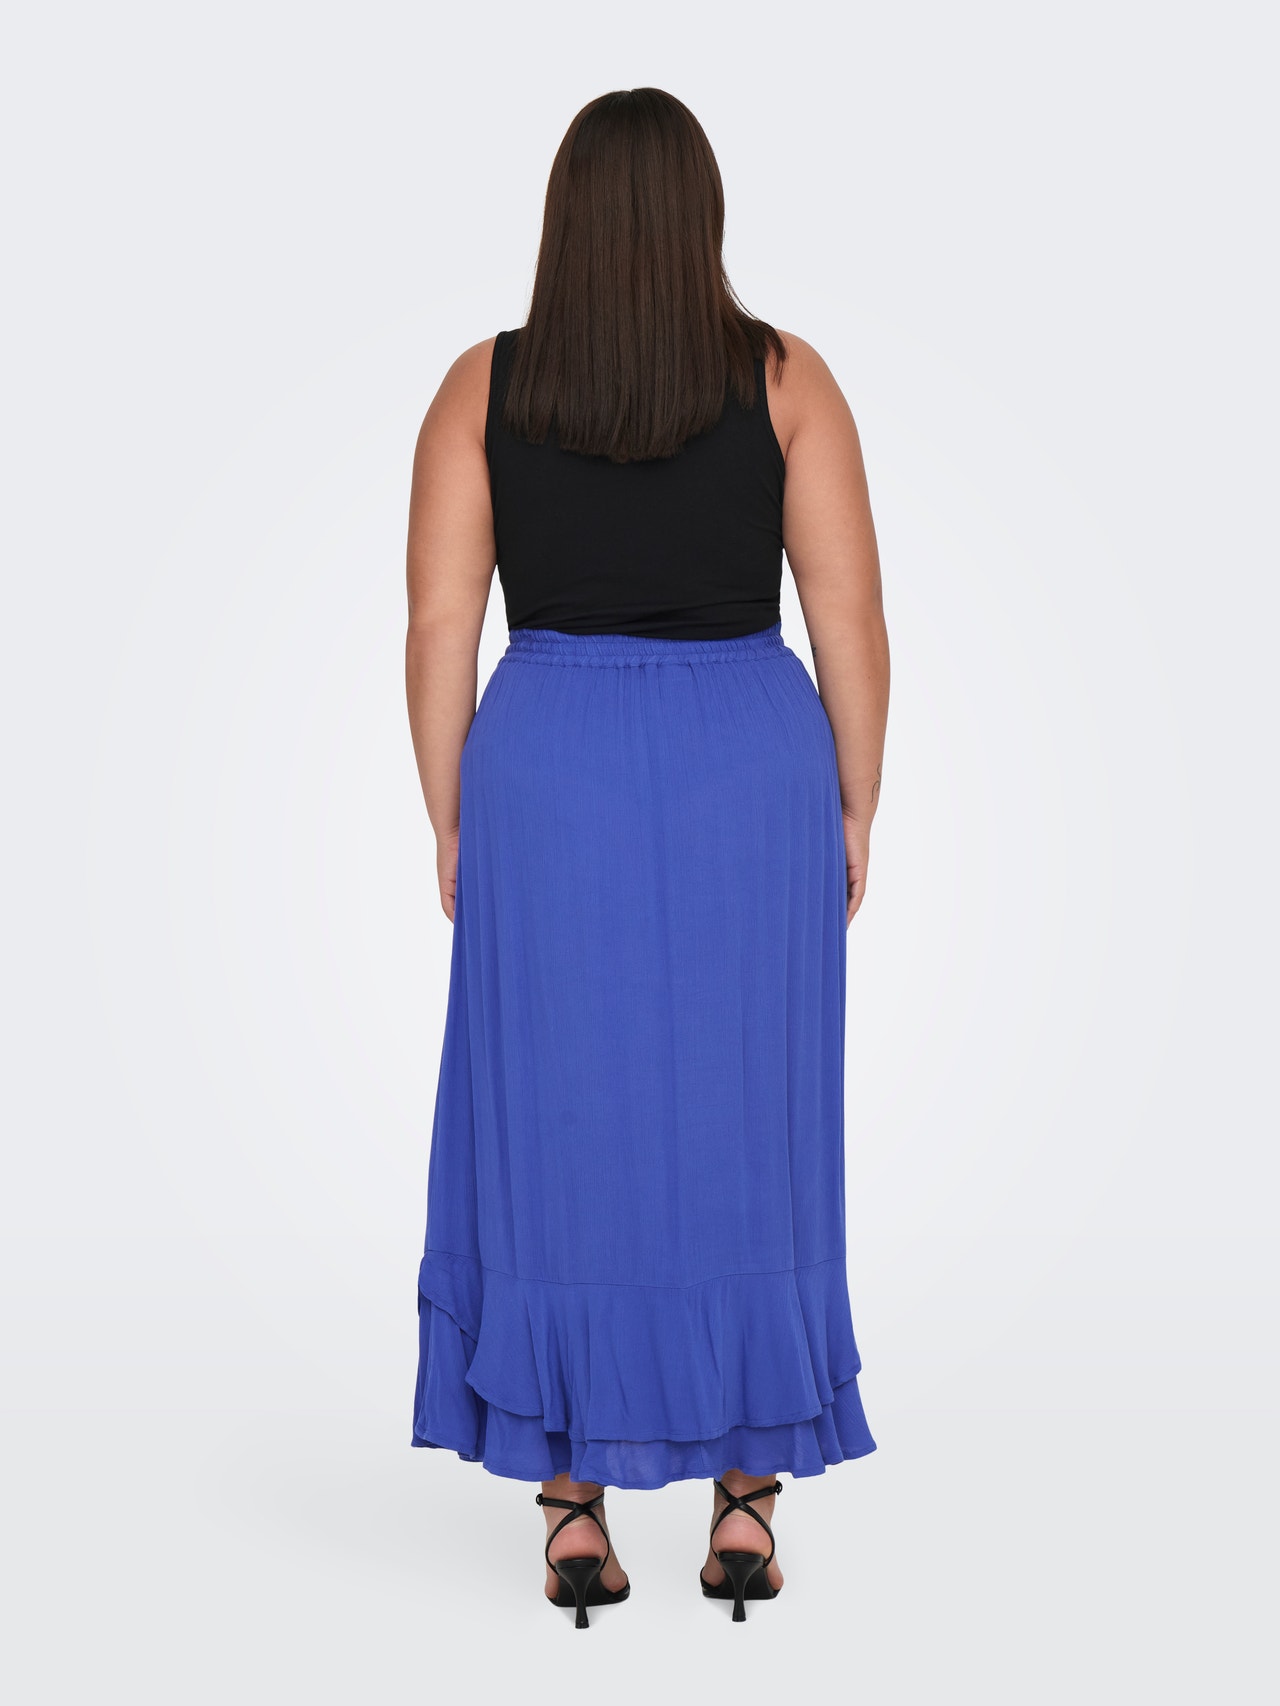 ONLY Curvy maxi skirt -Dazzling Blue - 15290011